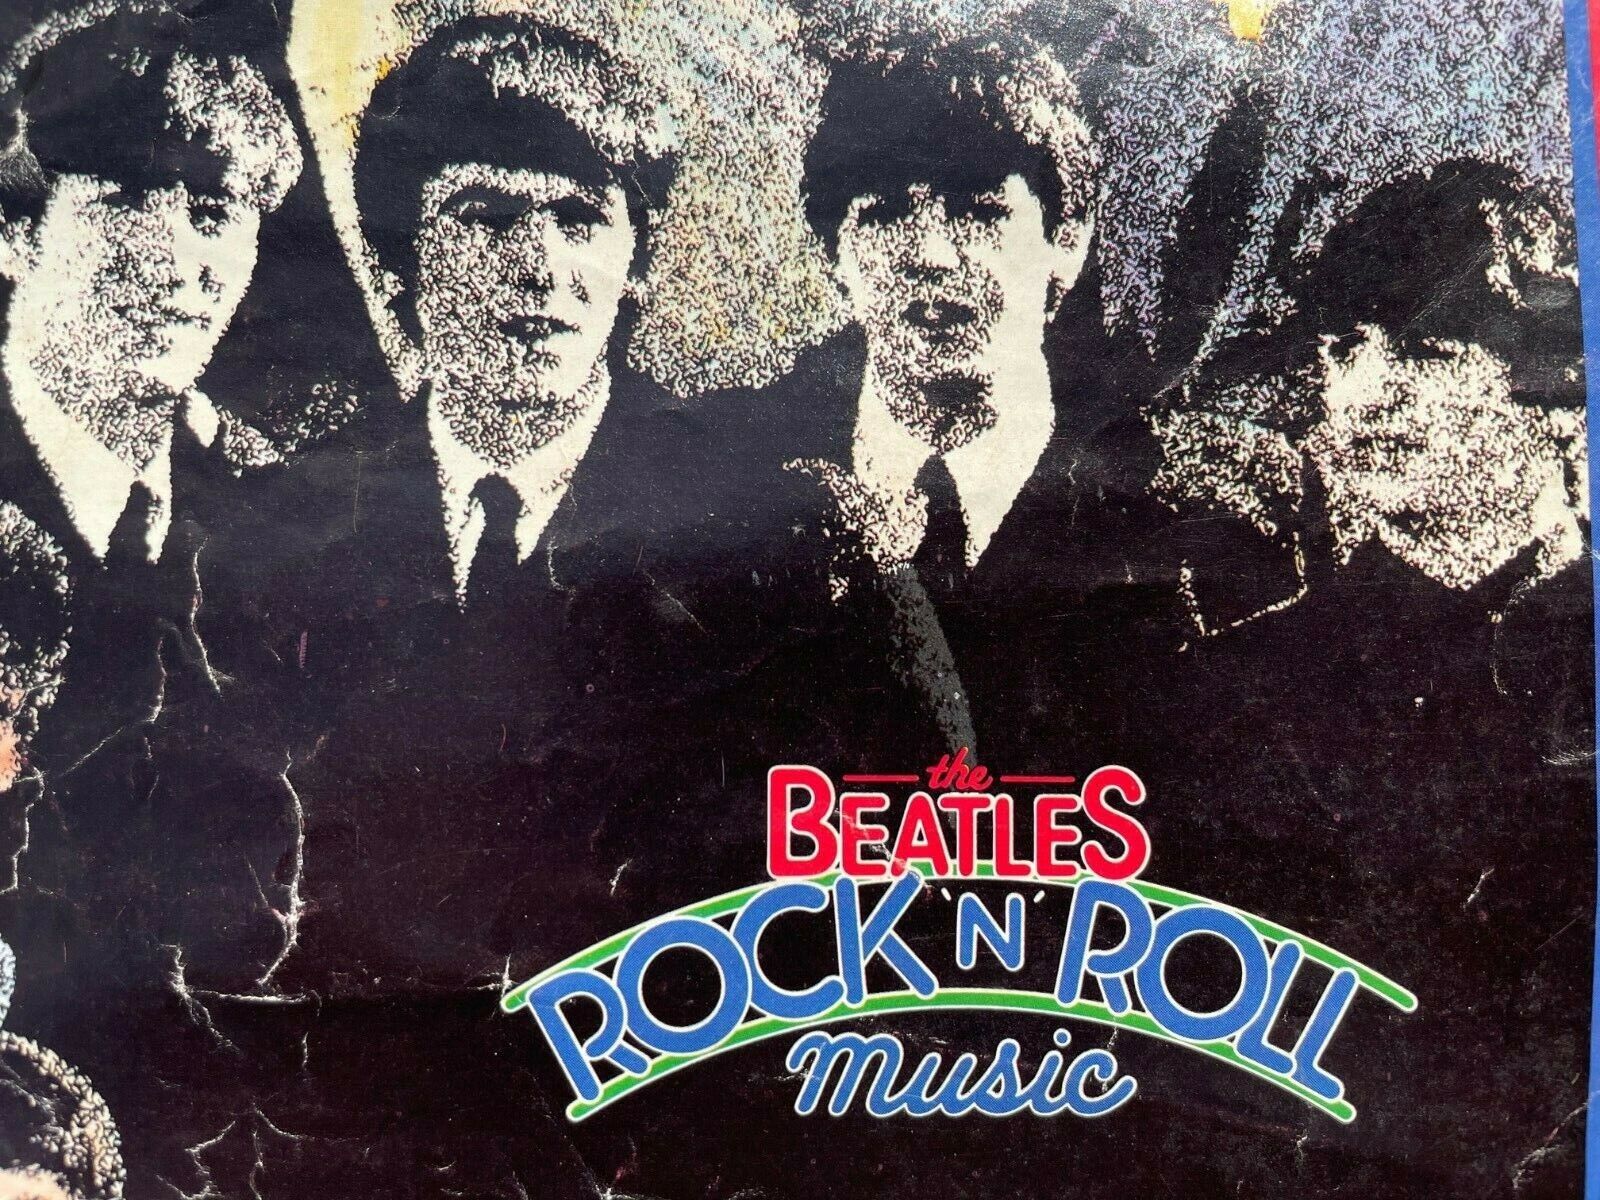 BEATLES ROCK 'N' ROLL MUSIC POSTER, 1976 CAPITOL RECORDS PROMO